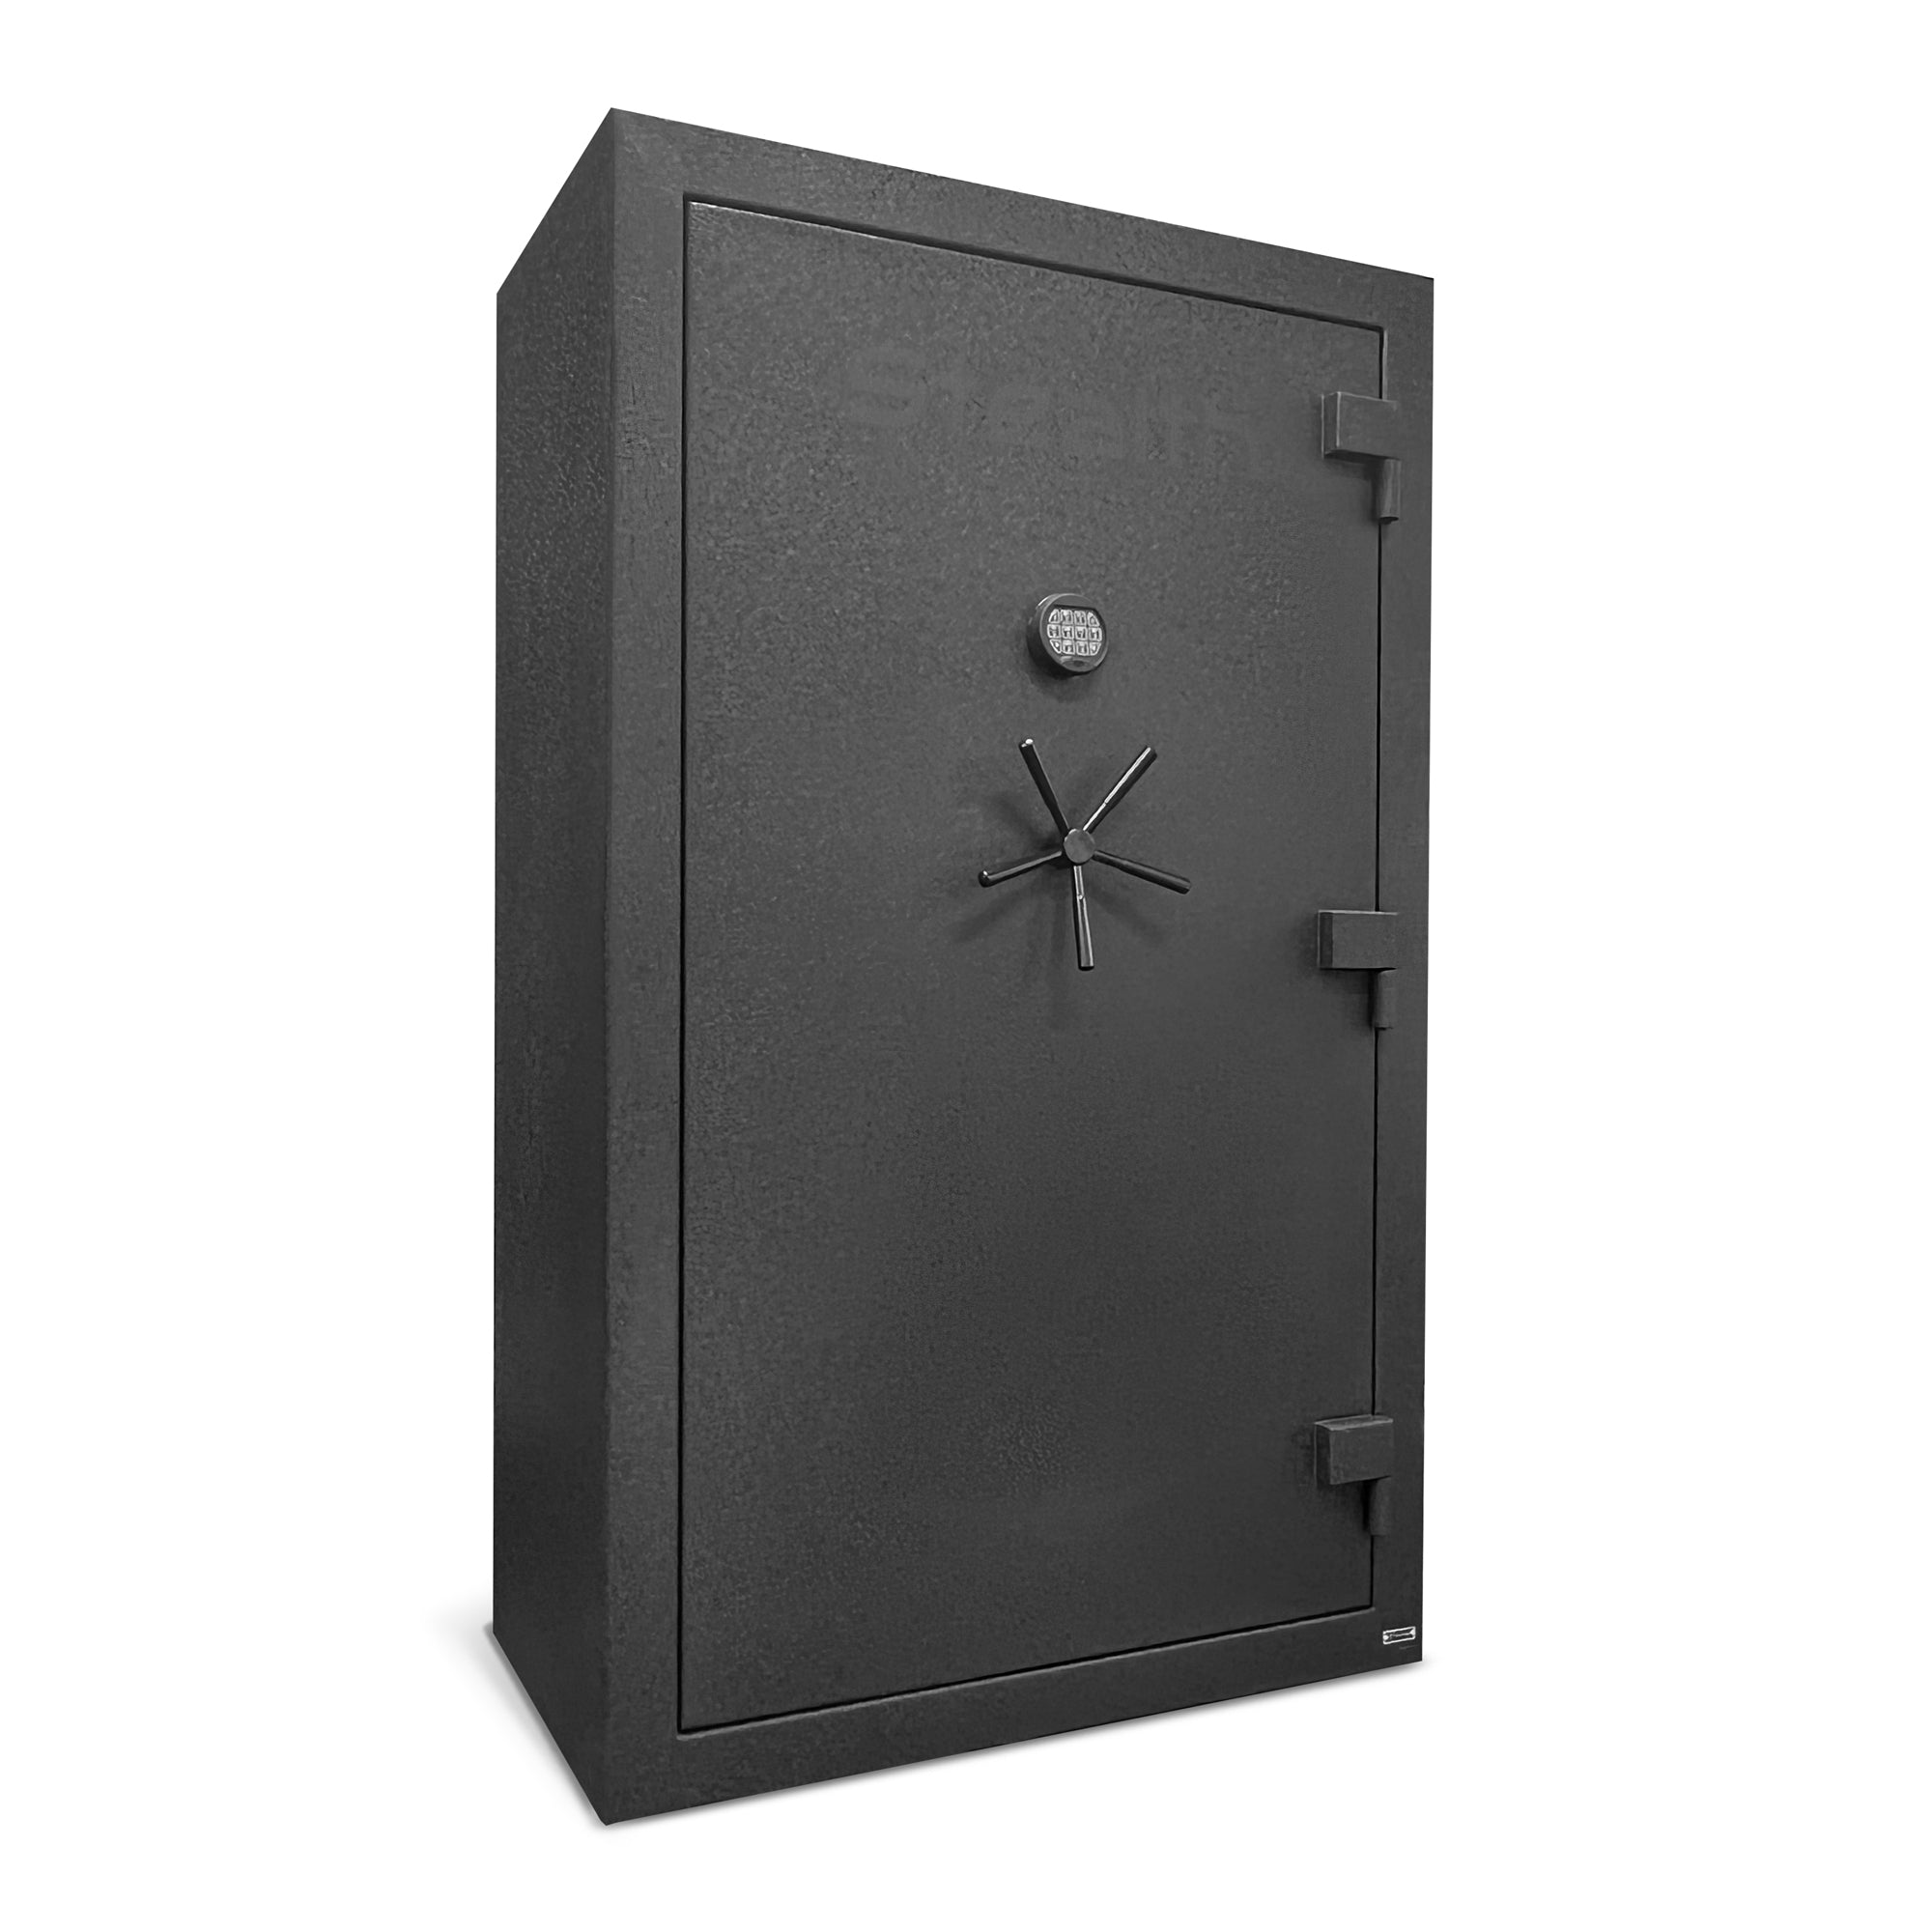 Changing The Combination On A Field And Stream Gun Safe Step By Step Guide: Secure It!